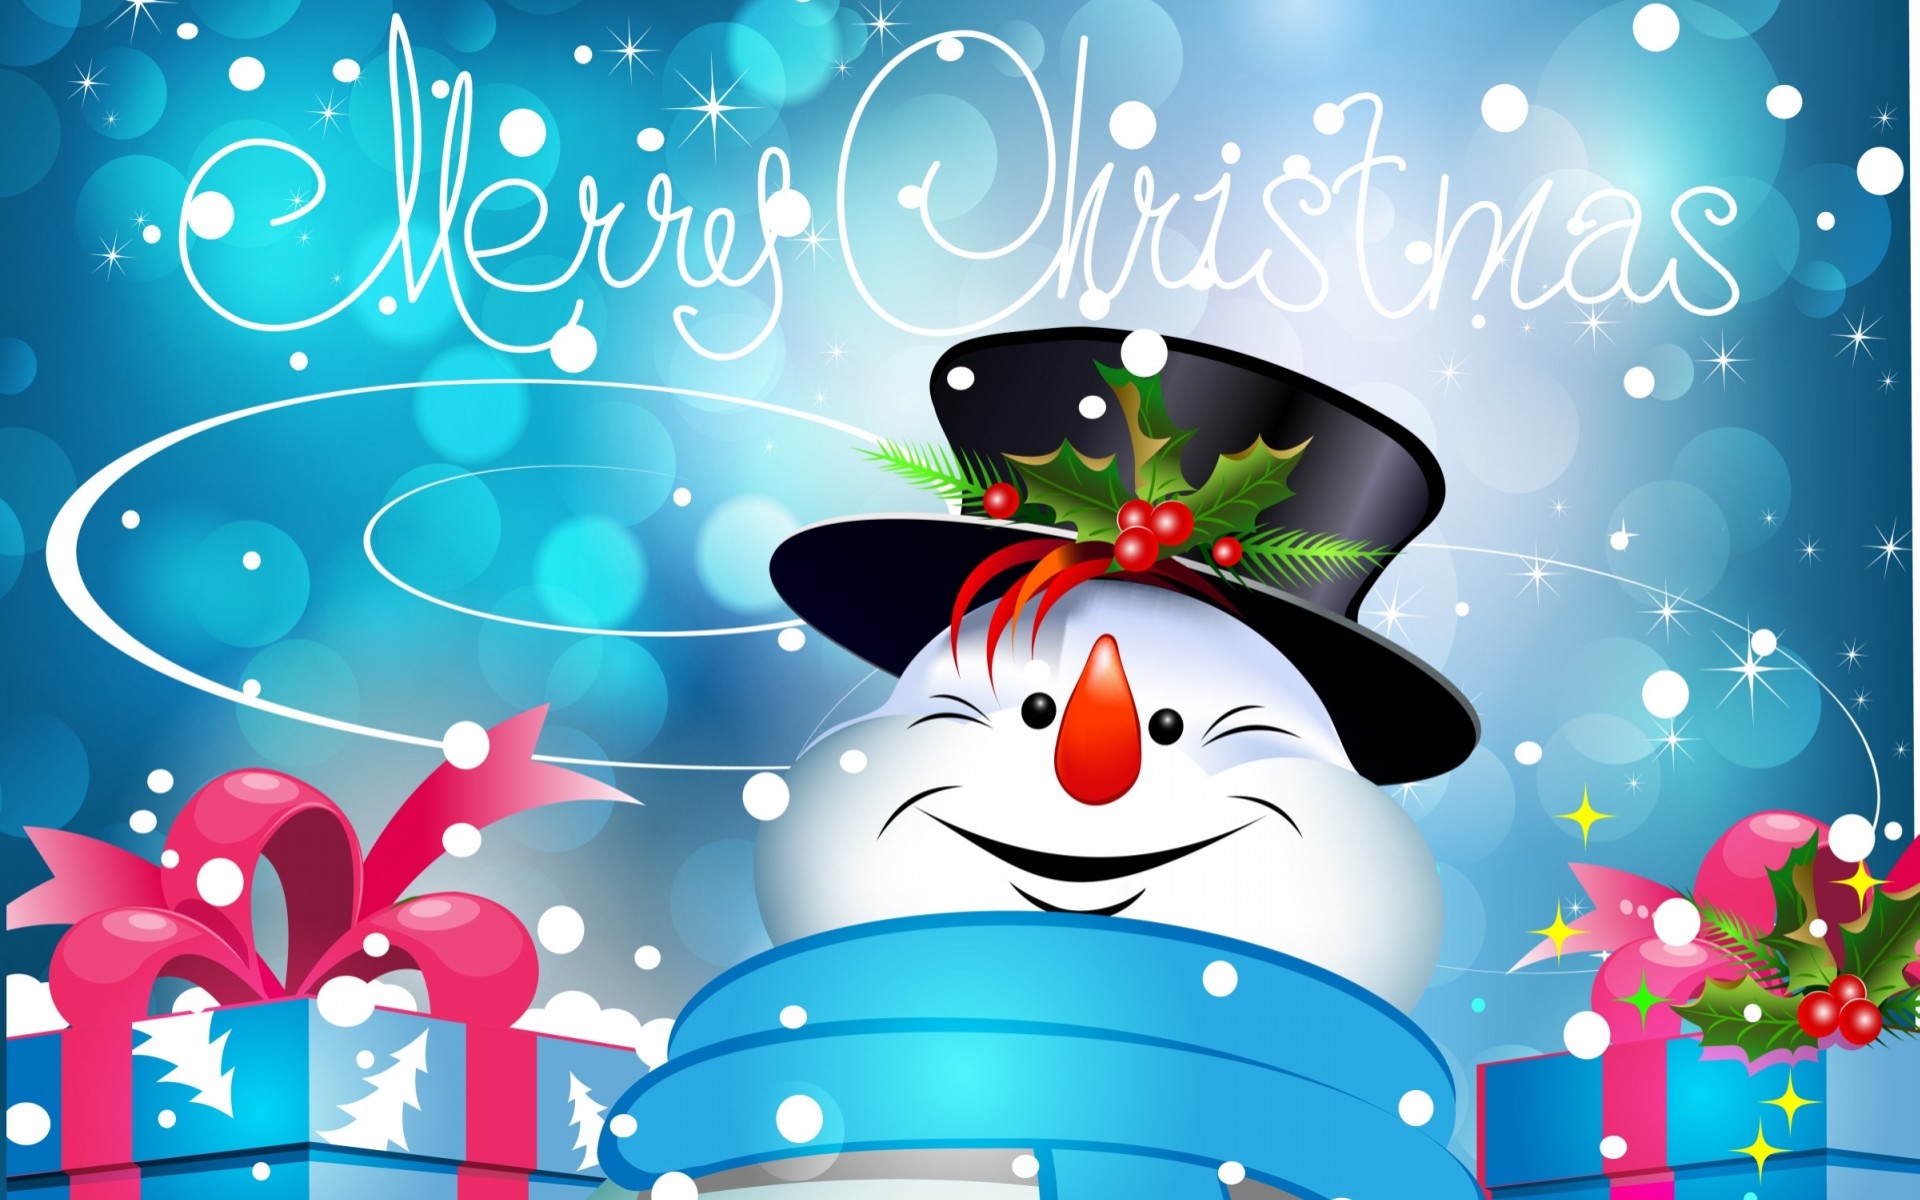 <b>Cute Christmas</b> Picture HD. | Animations | Pinterest